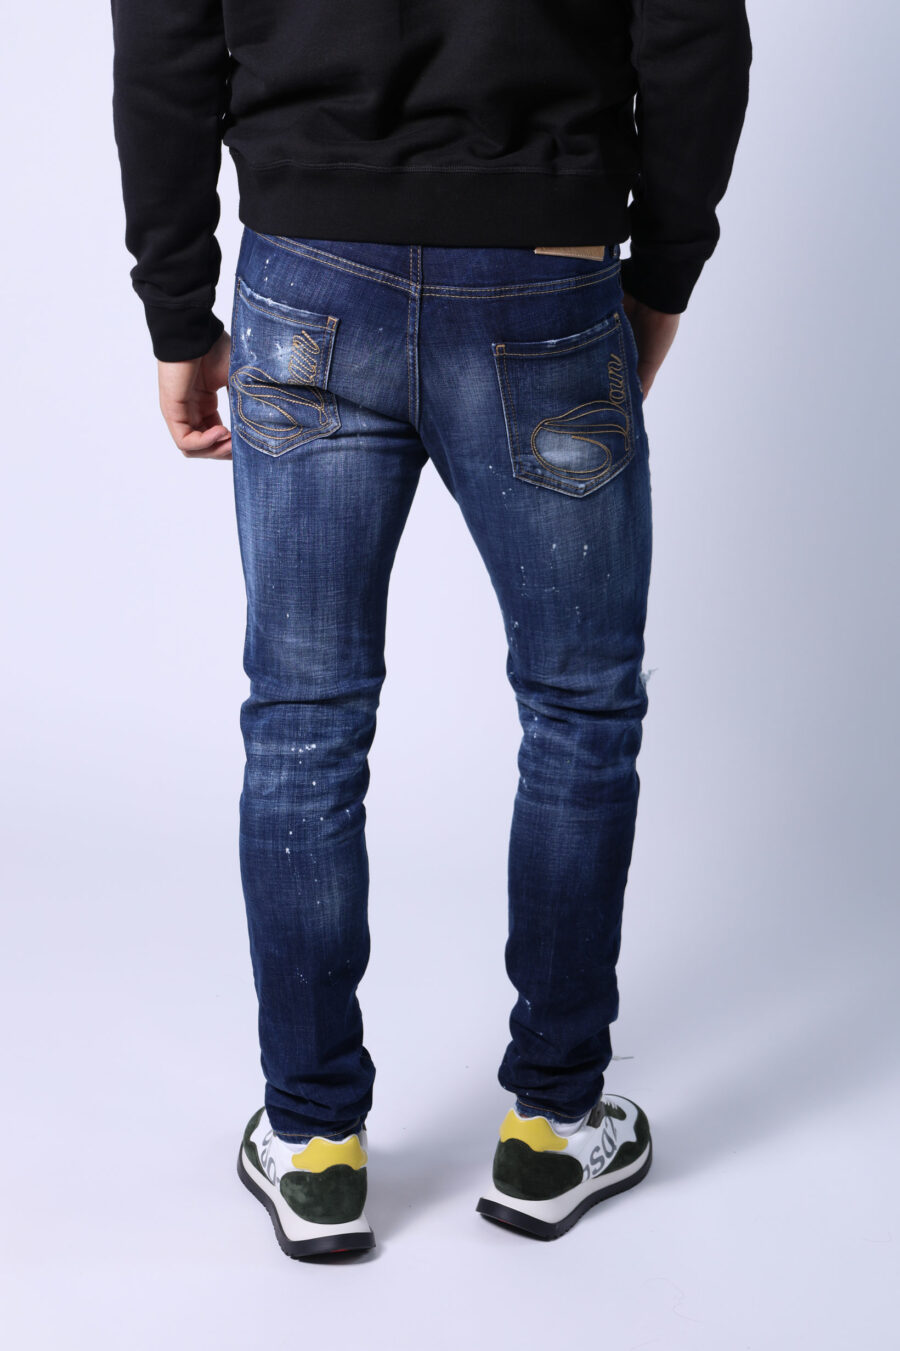 Blue "cool guy jean" jeans with paint and frayed - Untitled Catalog 05414